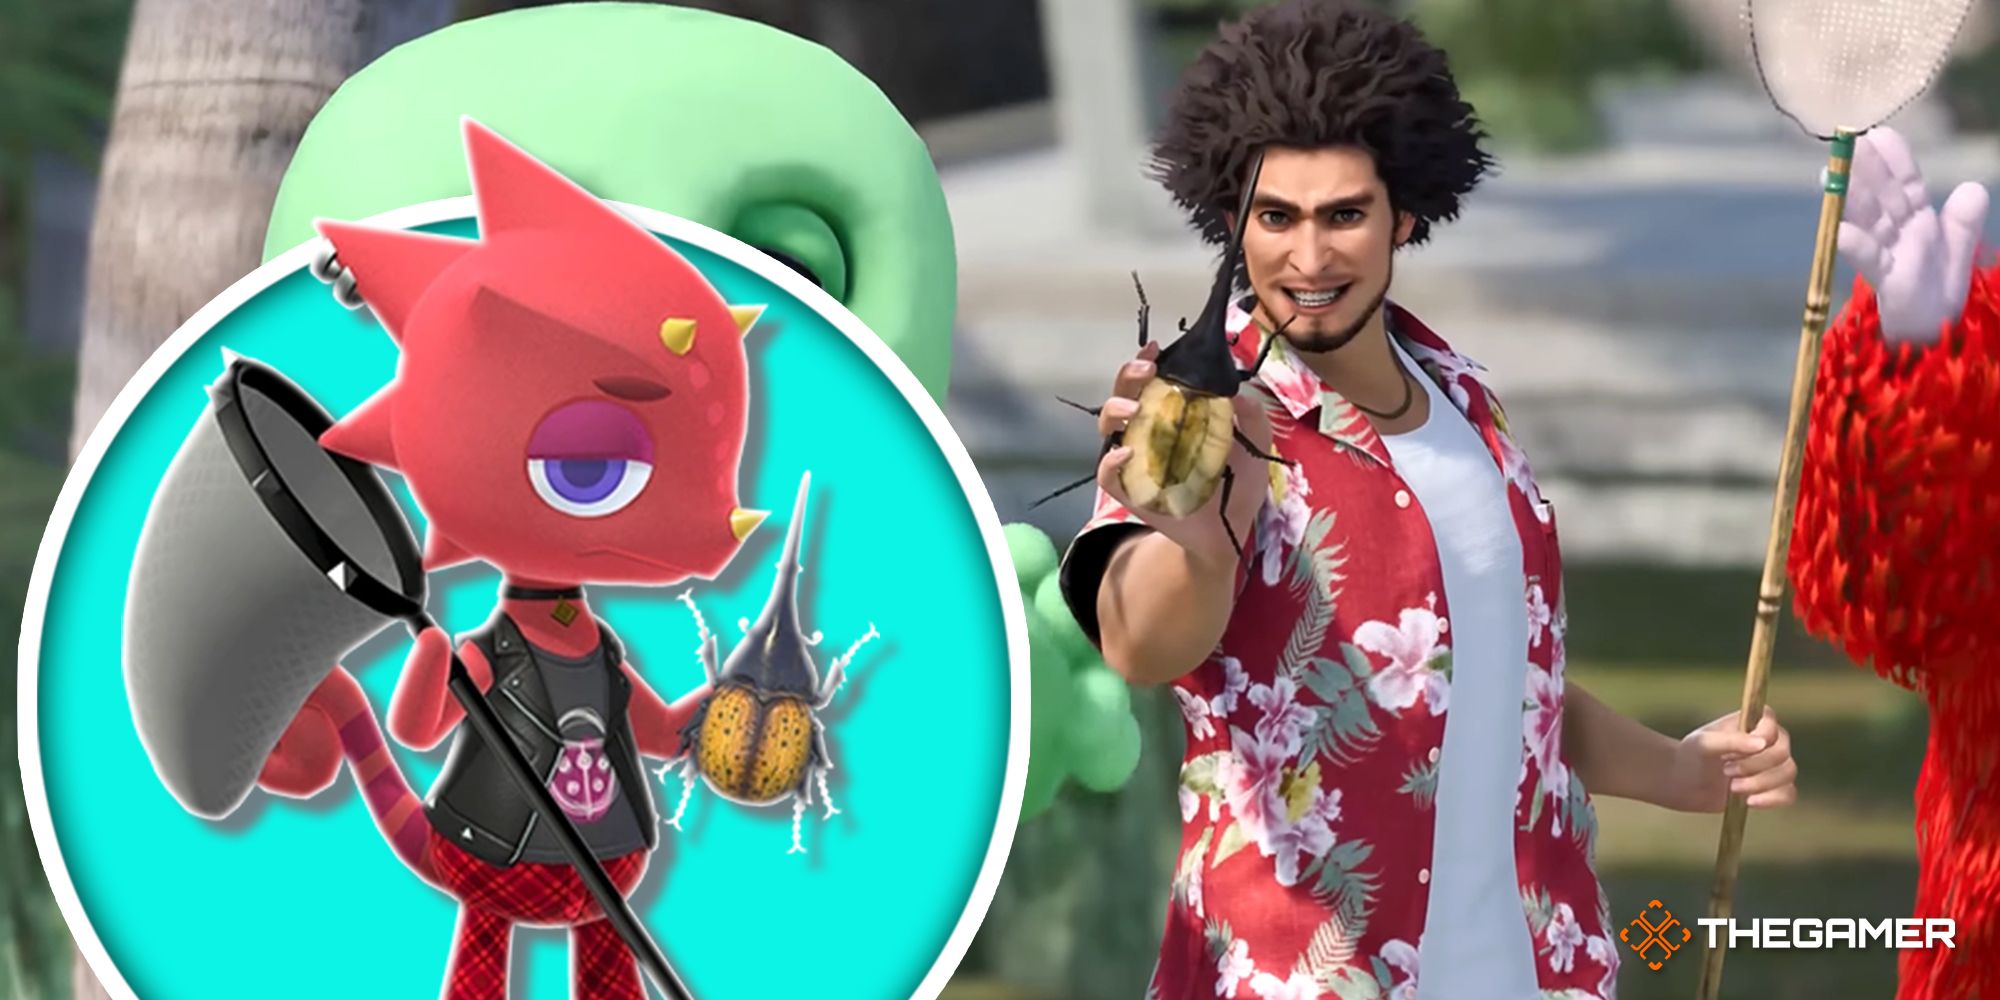 Ichiban Kasuga from Like A Dragon: Infinite Wealth holding a bug and a net, and a character in animal crossing doing the same thing